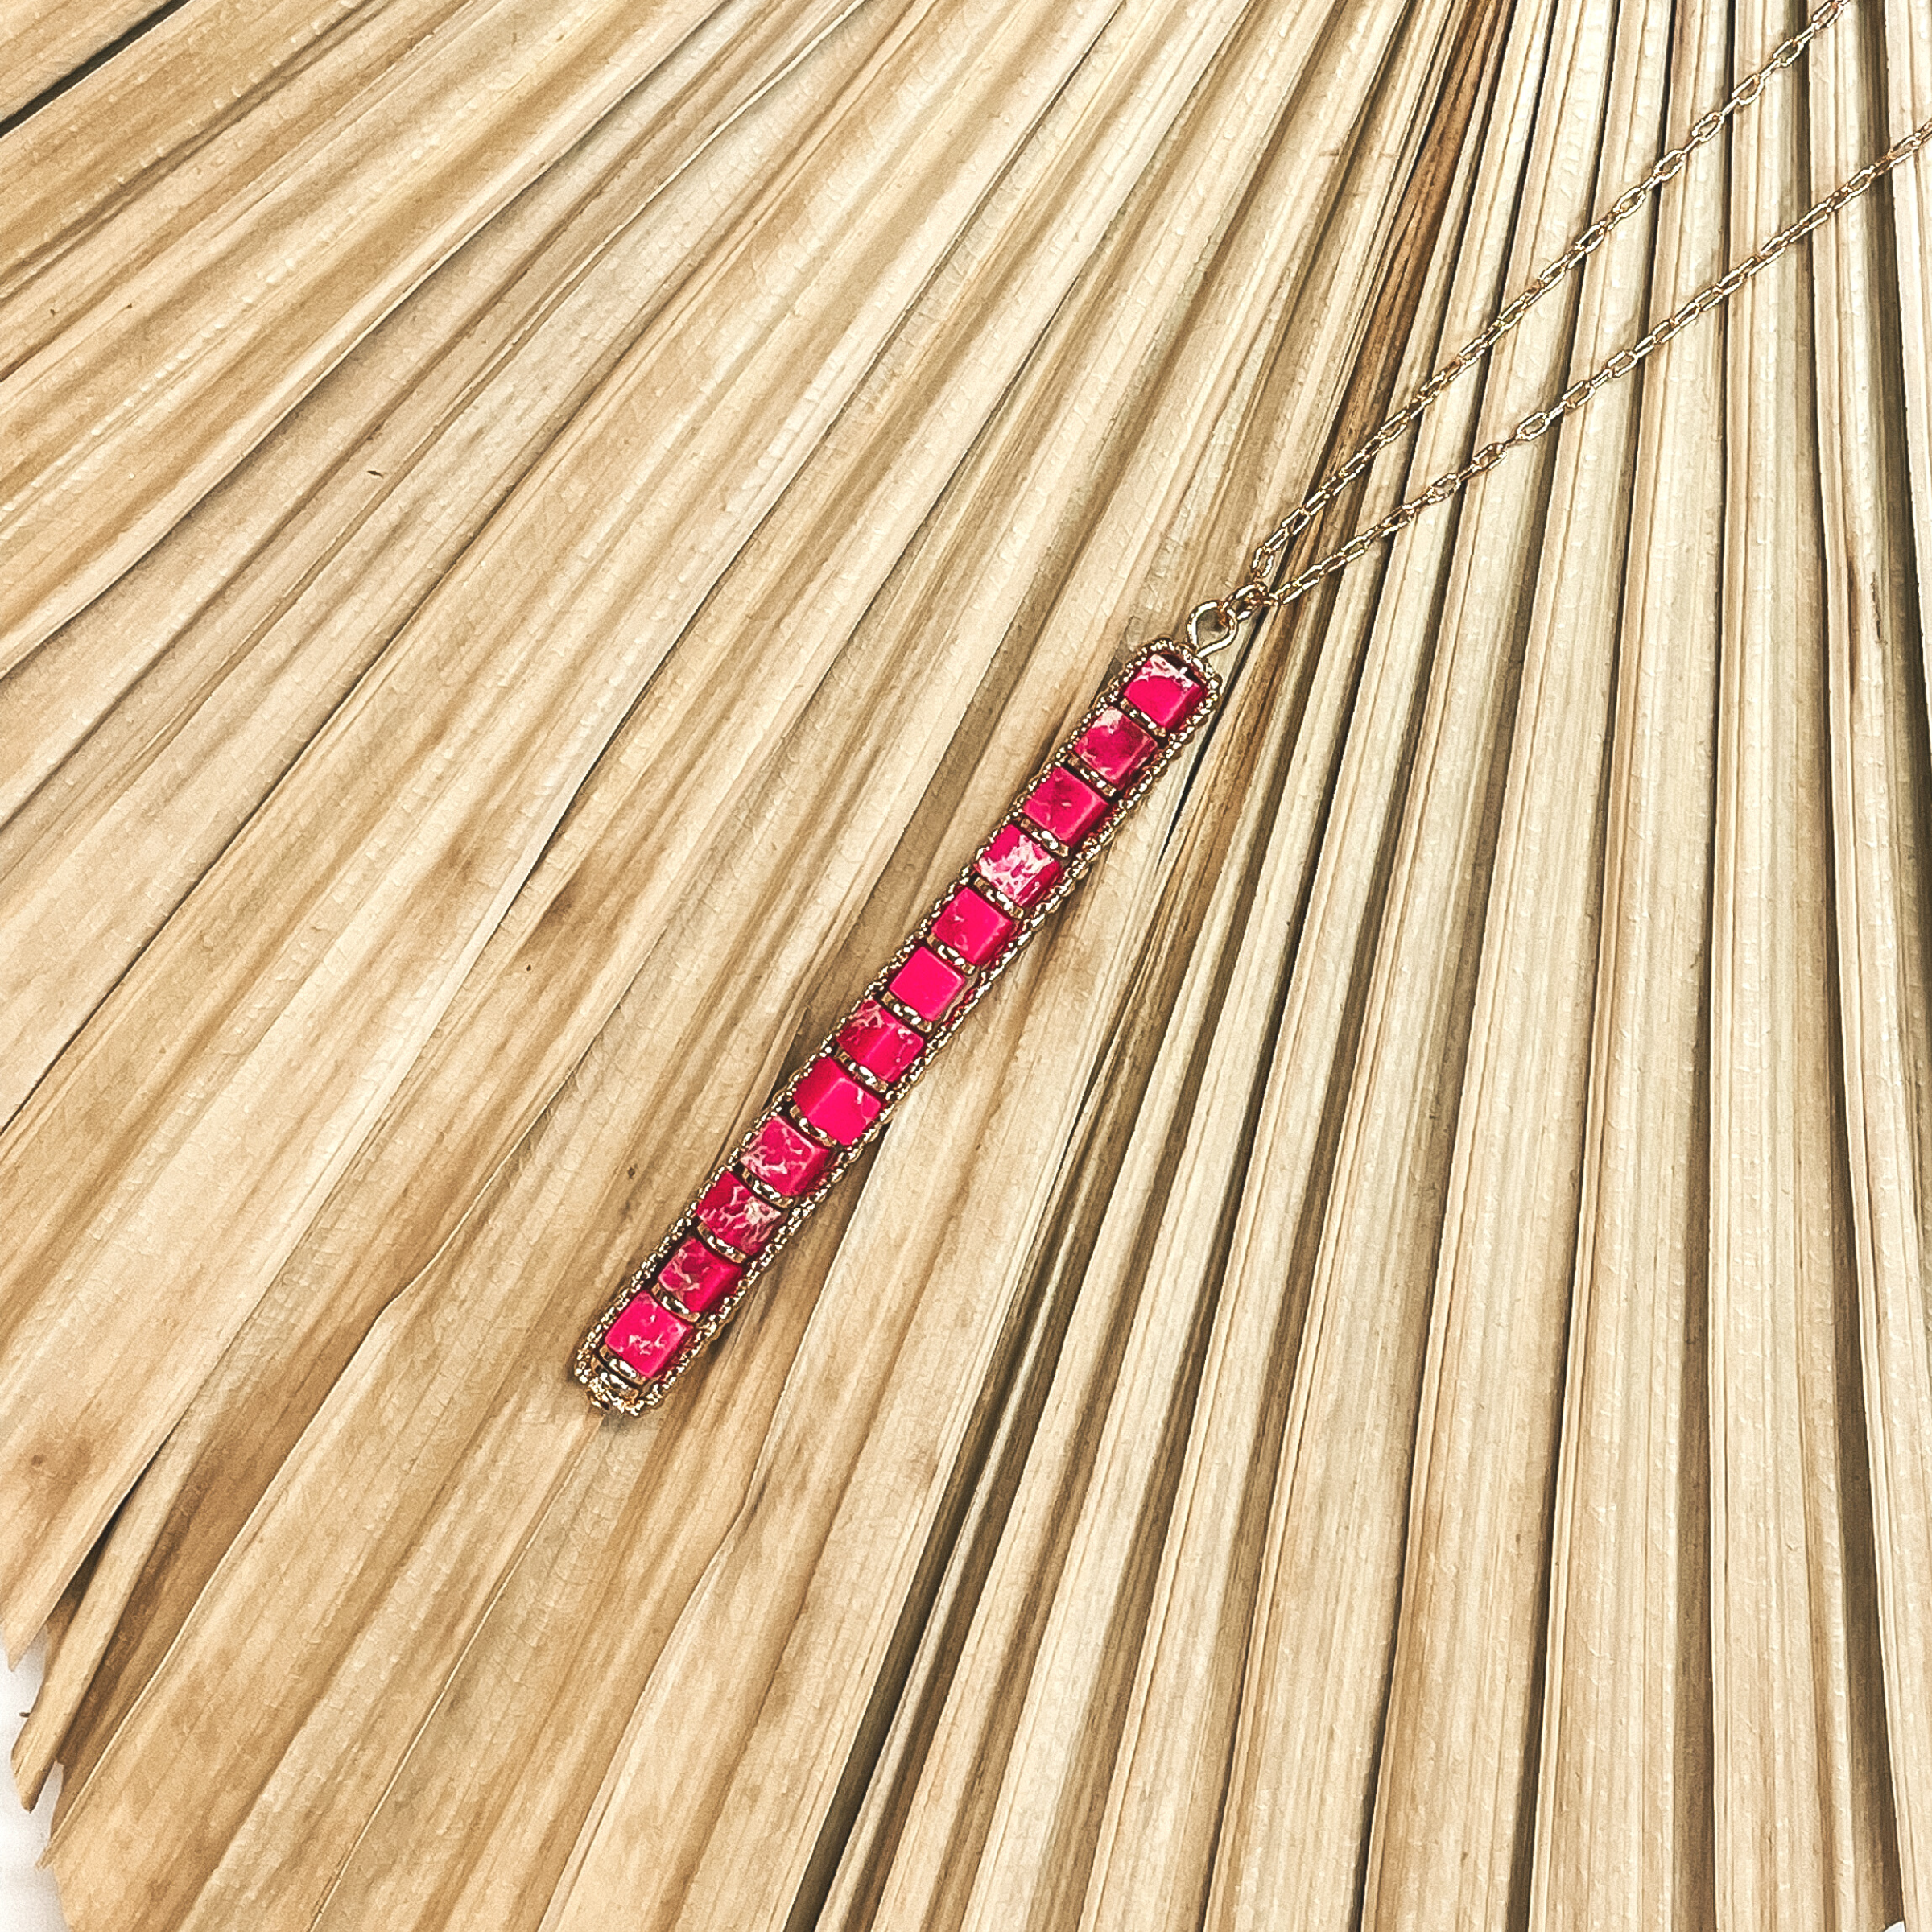 This is a long, thin, gold chain with a semi-precious bar pendant in fuchsia. This necklace is taken on a  dried up  palm leaf and white background.